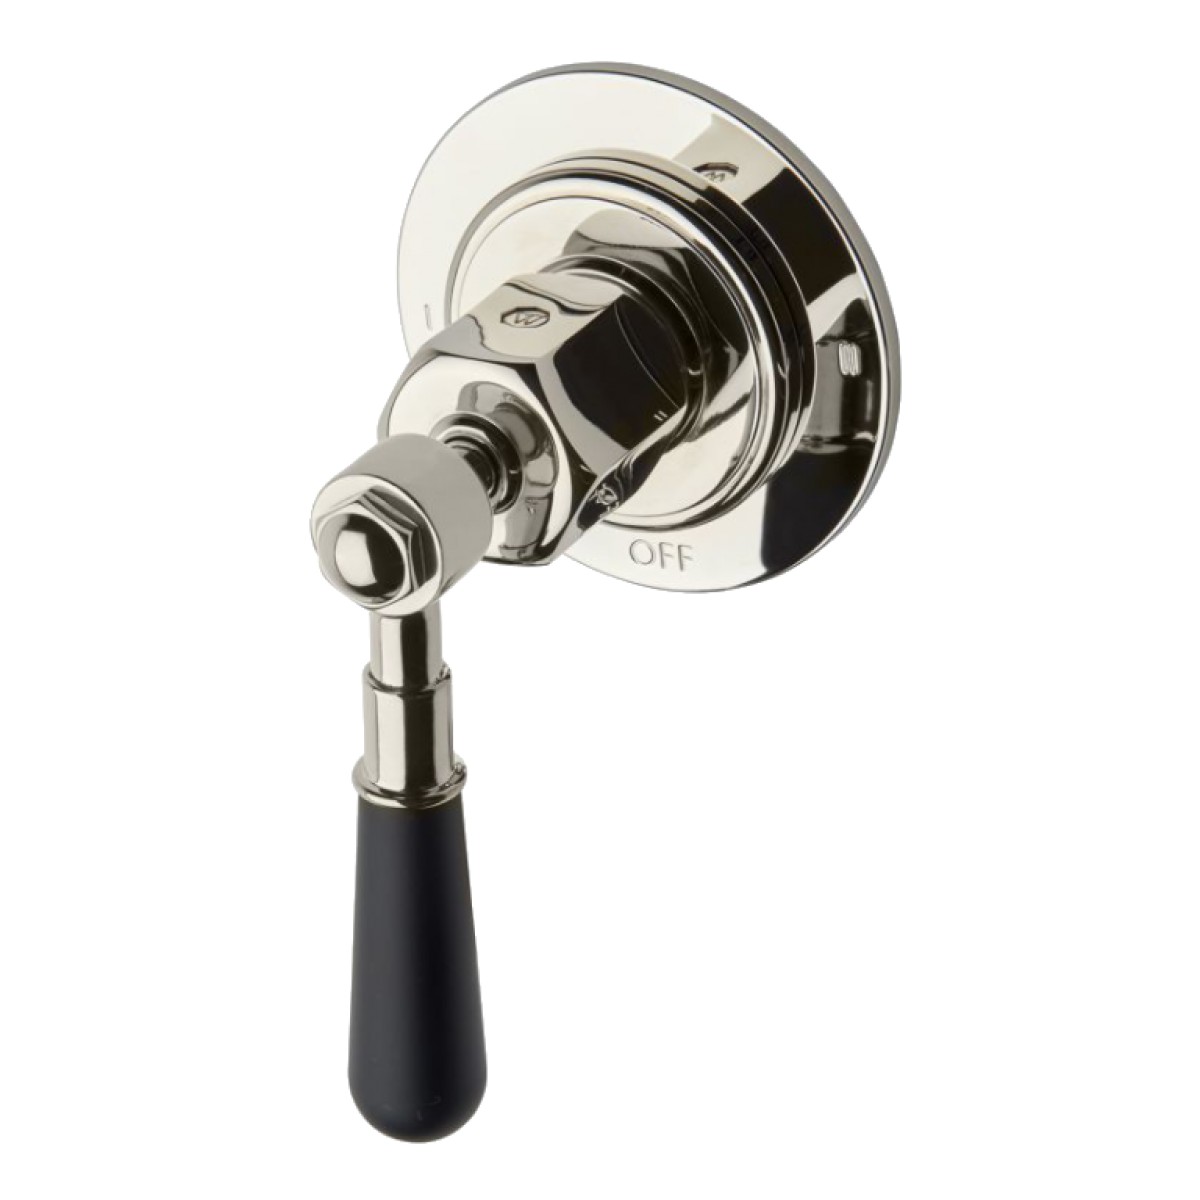 Regulator Two Way Diverter Valve Trim for Thermostatic with Roman Numerals and Two-Tone Lever Handle